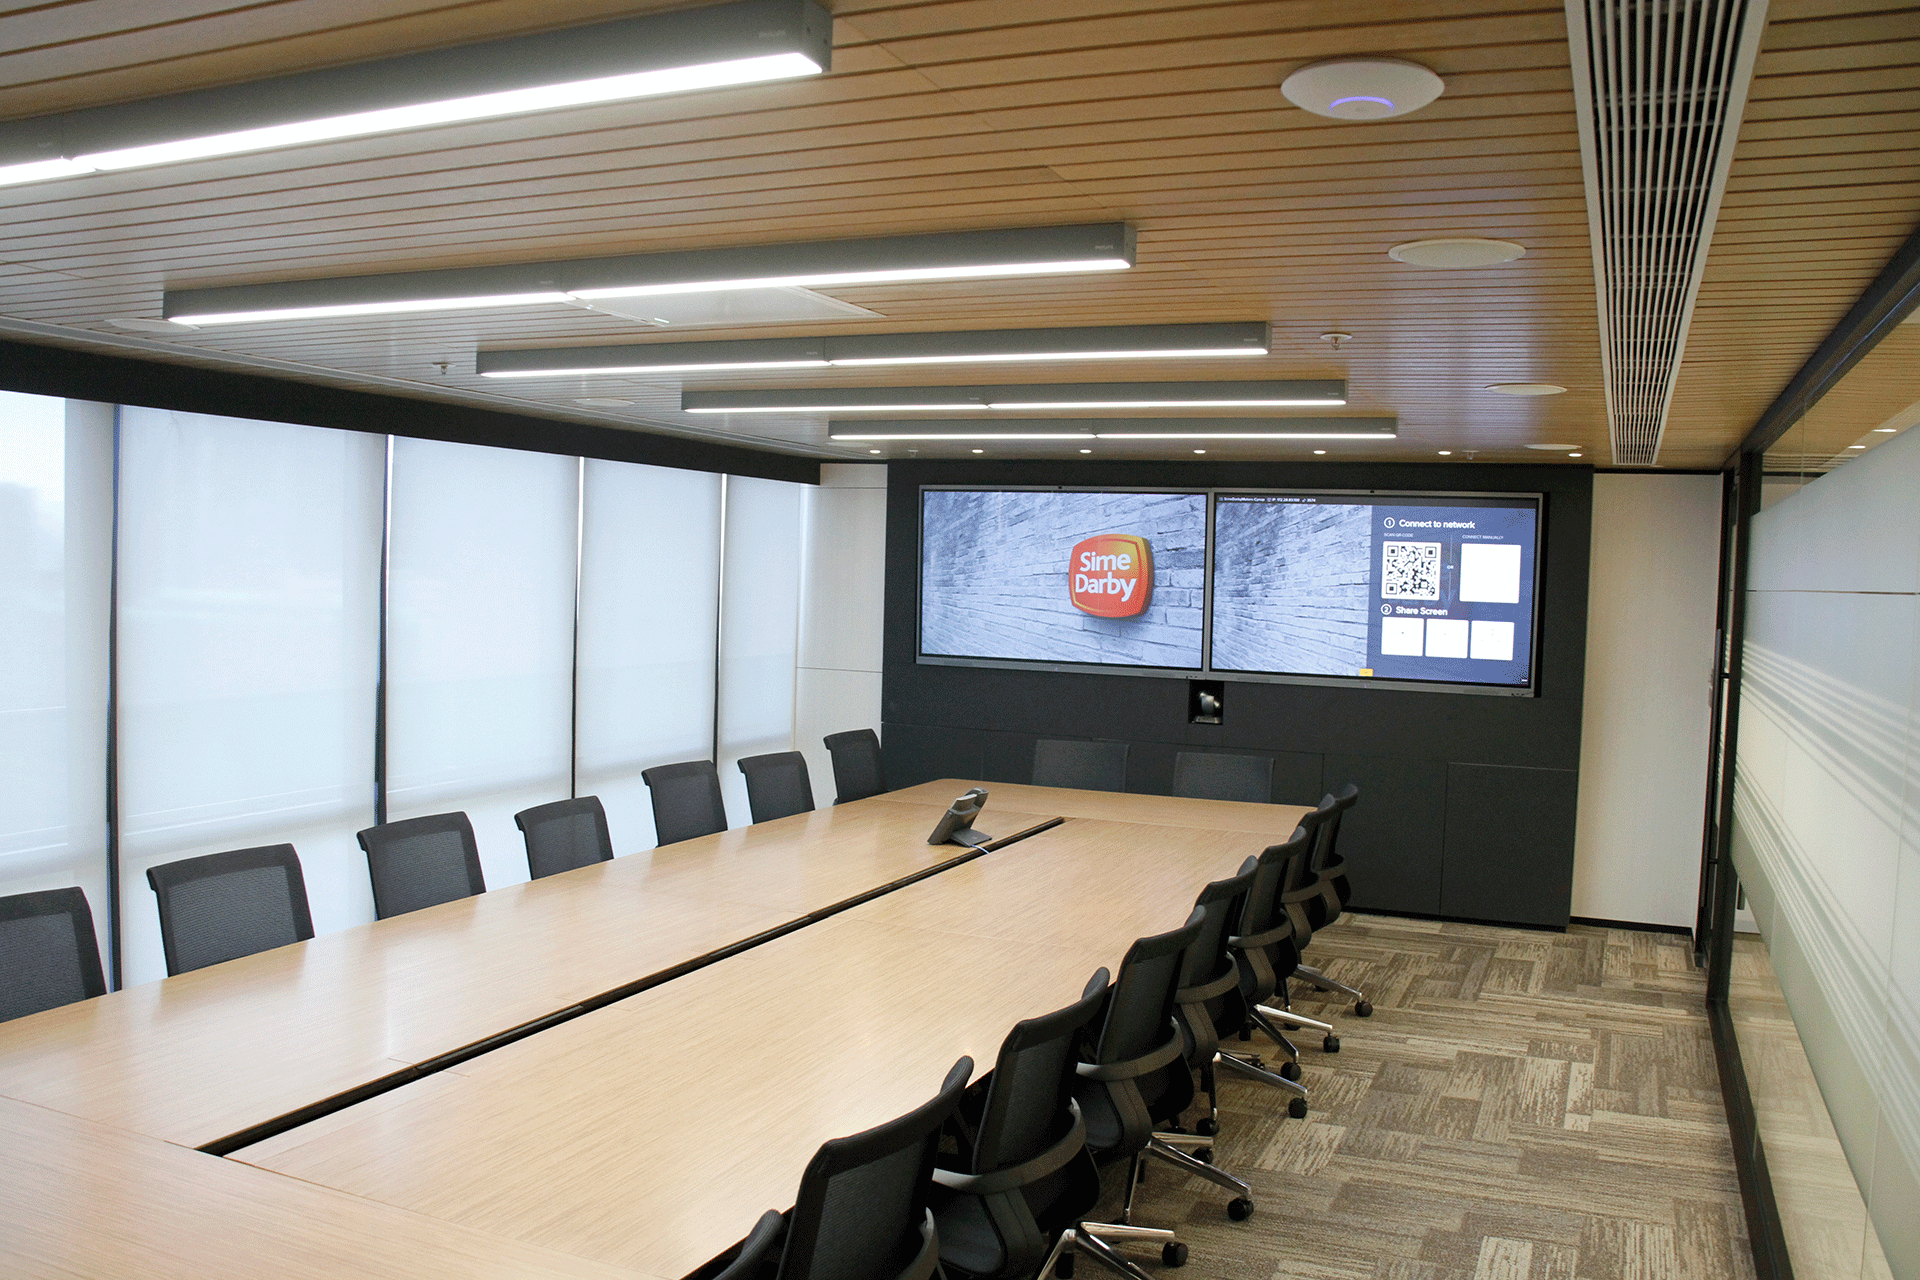 totalgroups environment hk Sime Darby Motors conference room interior design